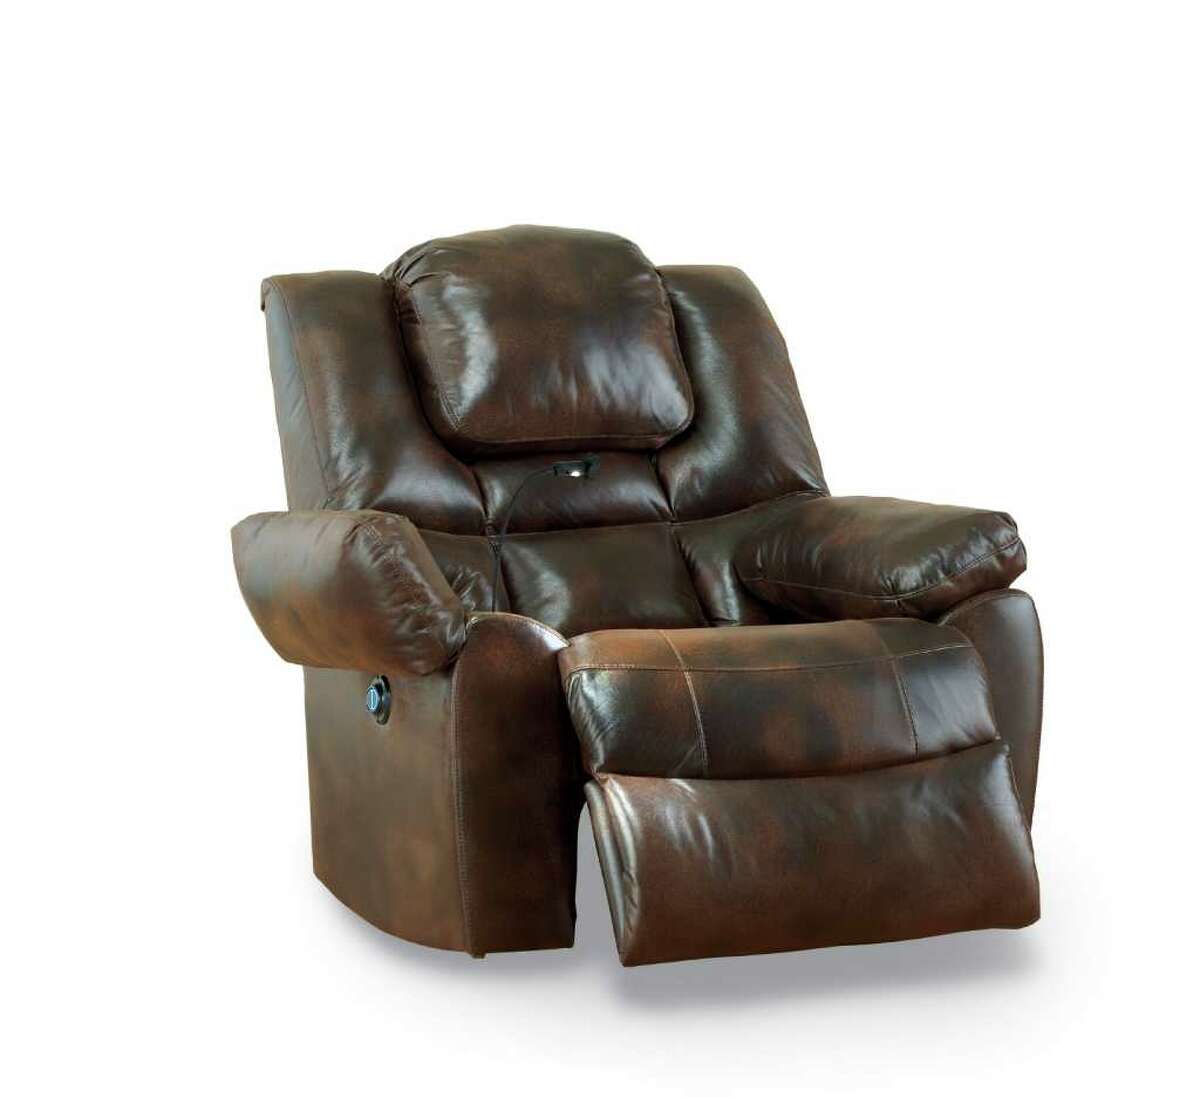 This leather power lift recliner by JCP home offers dual massage and heat with dashboard-mount control a retractable LED reading light and hidden storage compartments in both arms, as well as a cup holder and magazine pocket, $1,150 at JCPenney.